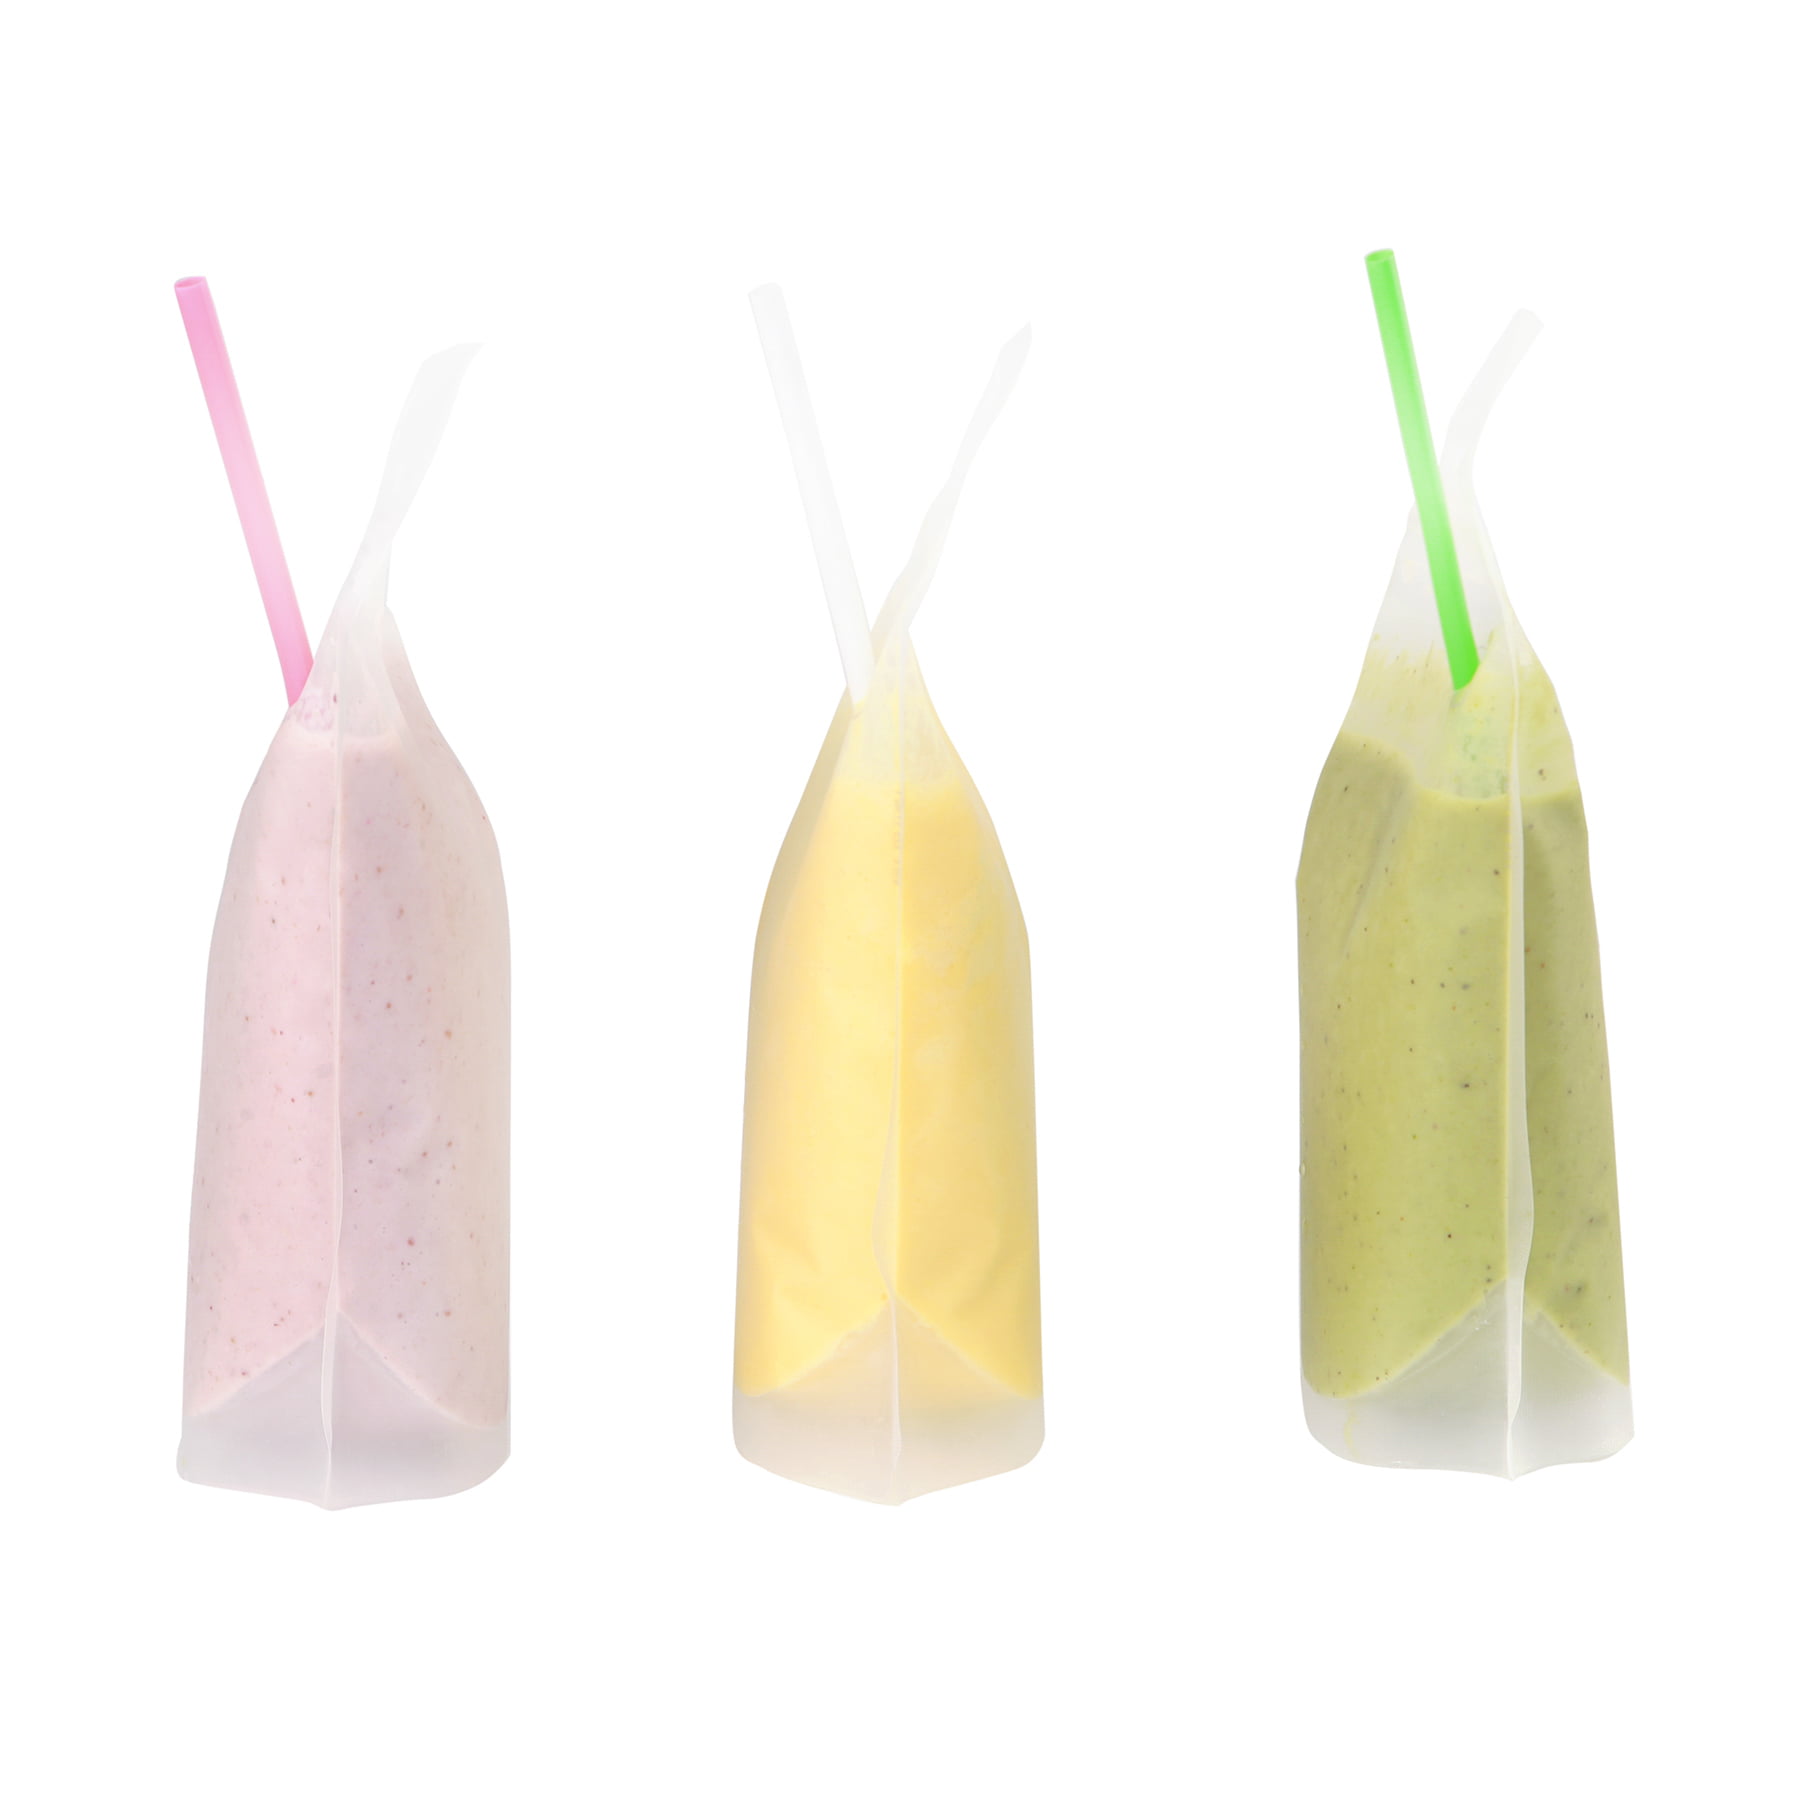 100PCS Drink Pouches with Straw Smoothie Bags Juice Pouches with 100 Drink  Straws, Heavy Duty Hand-Held Translucent Reclosable Ice Drink Pouches Bag  by C CRYSTAL LEMON 